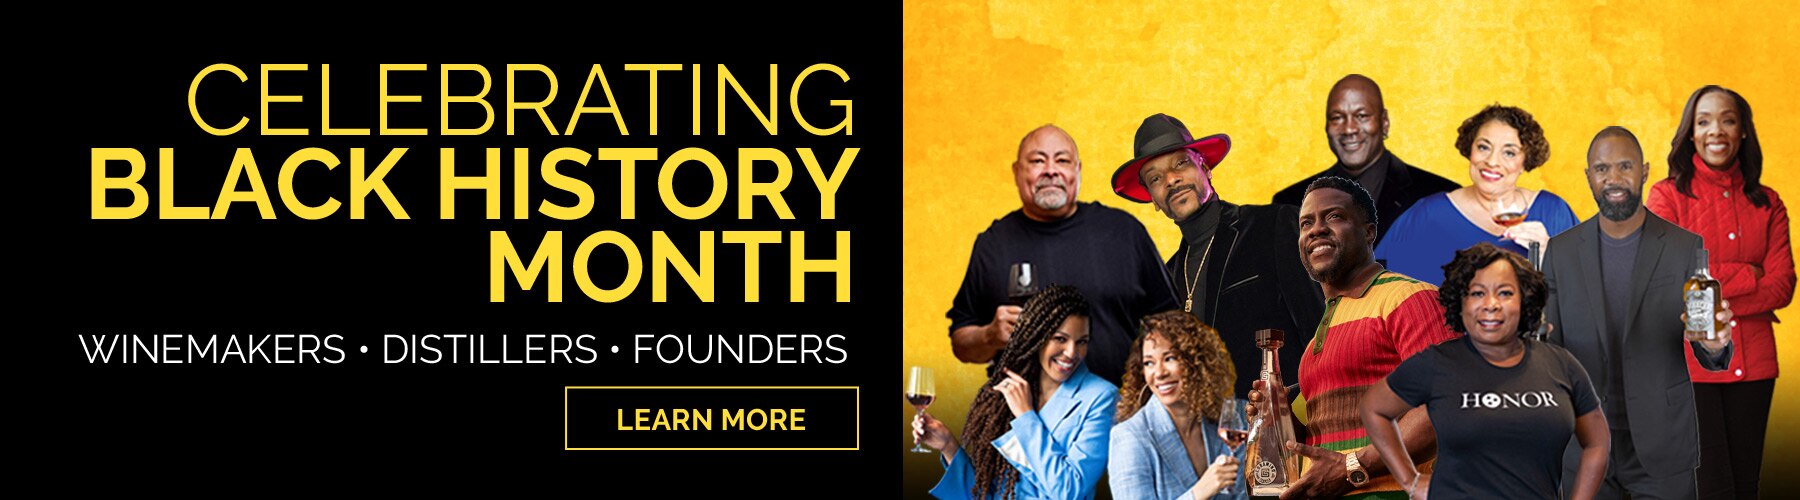 Celebrating Black History Month with Black Winemakers, Distillers and Founders